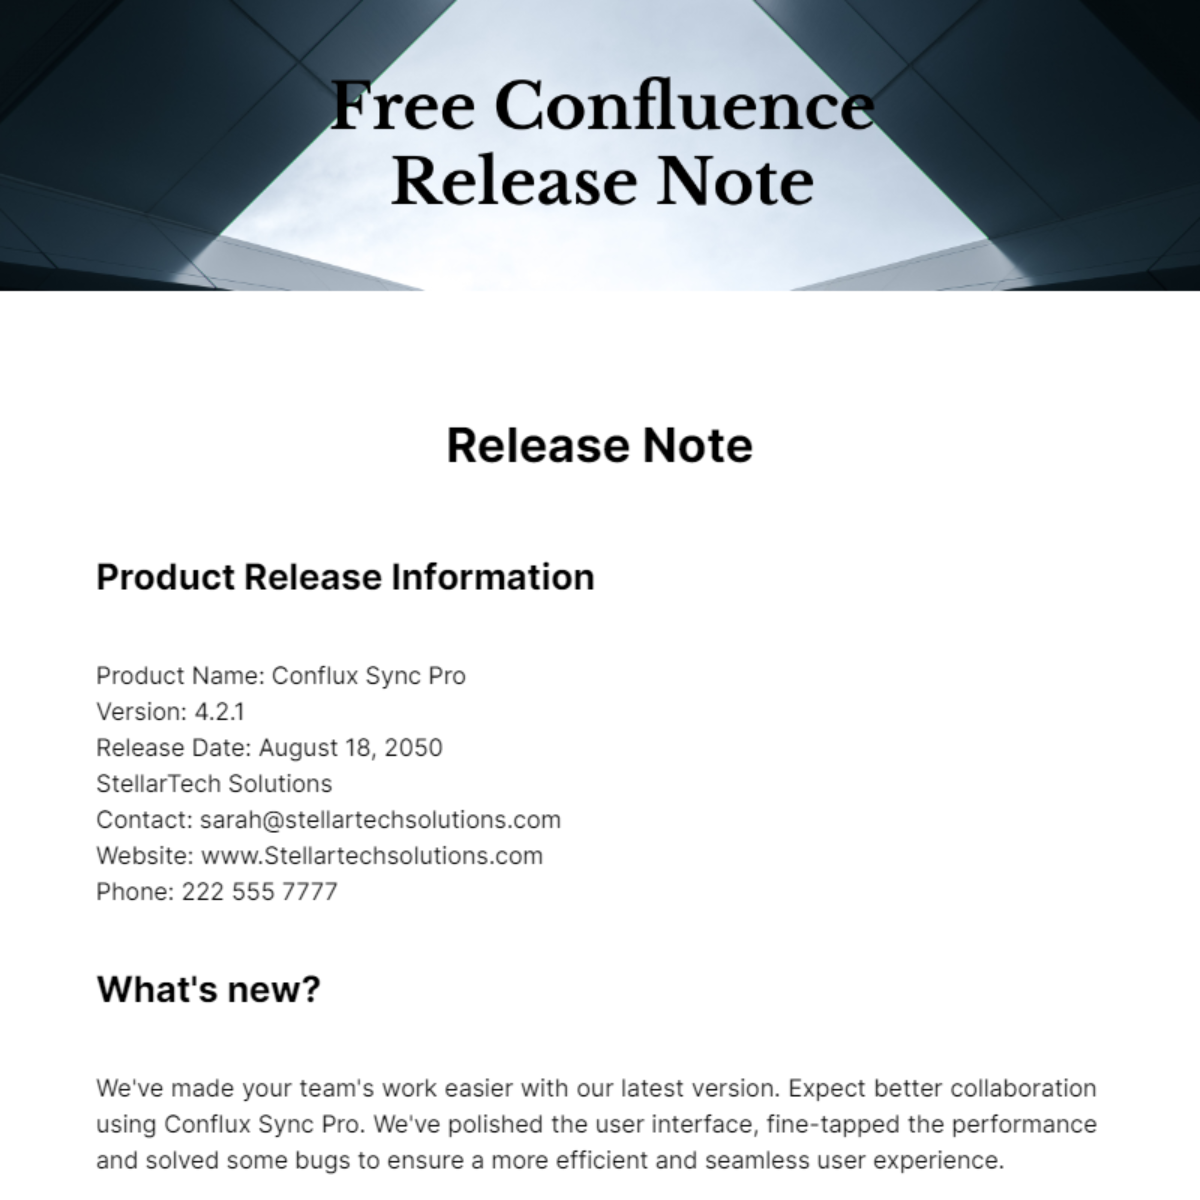 Confluence Release Note Template